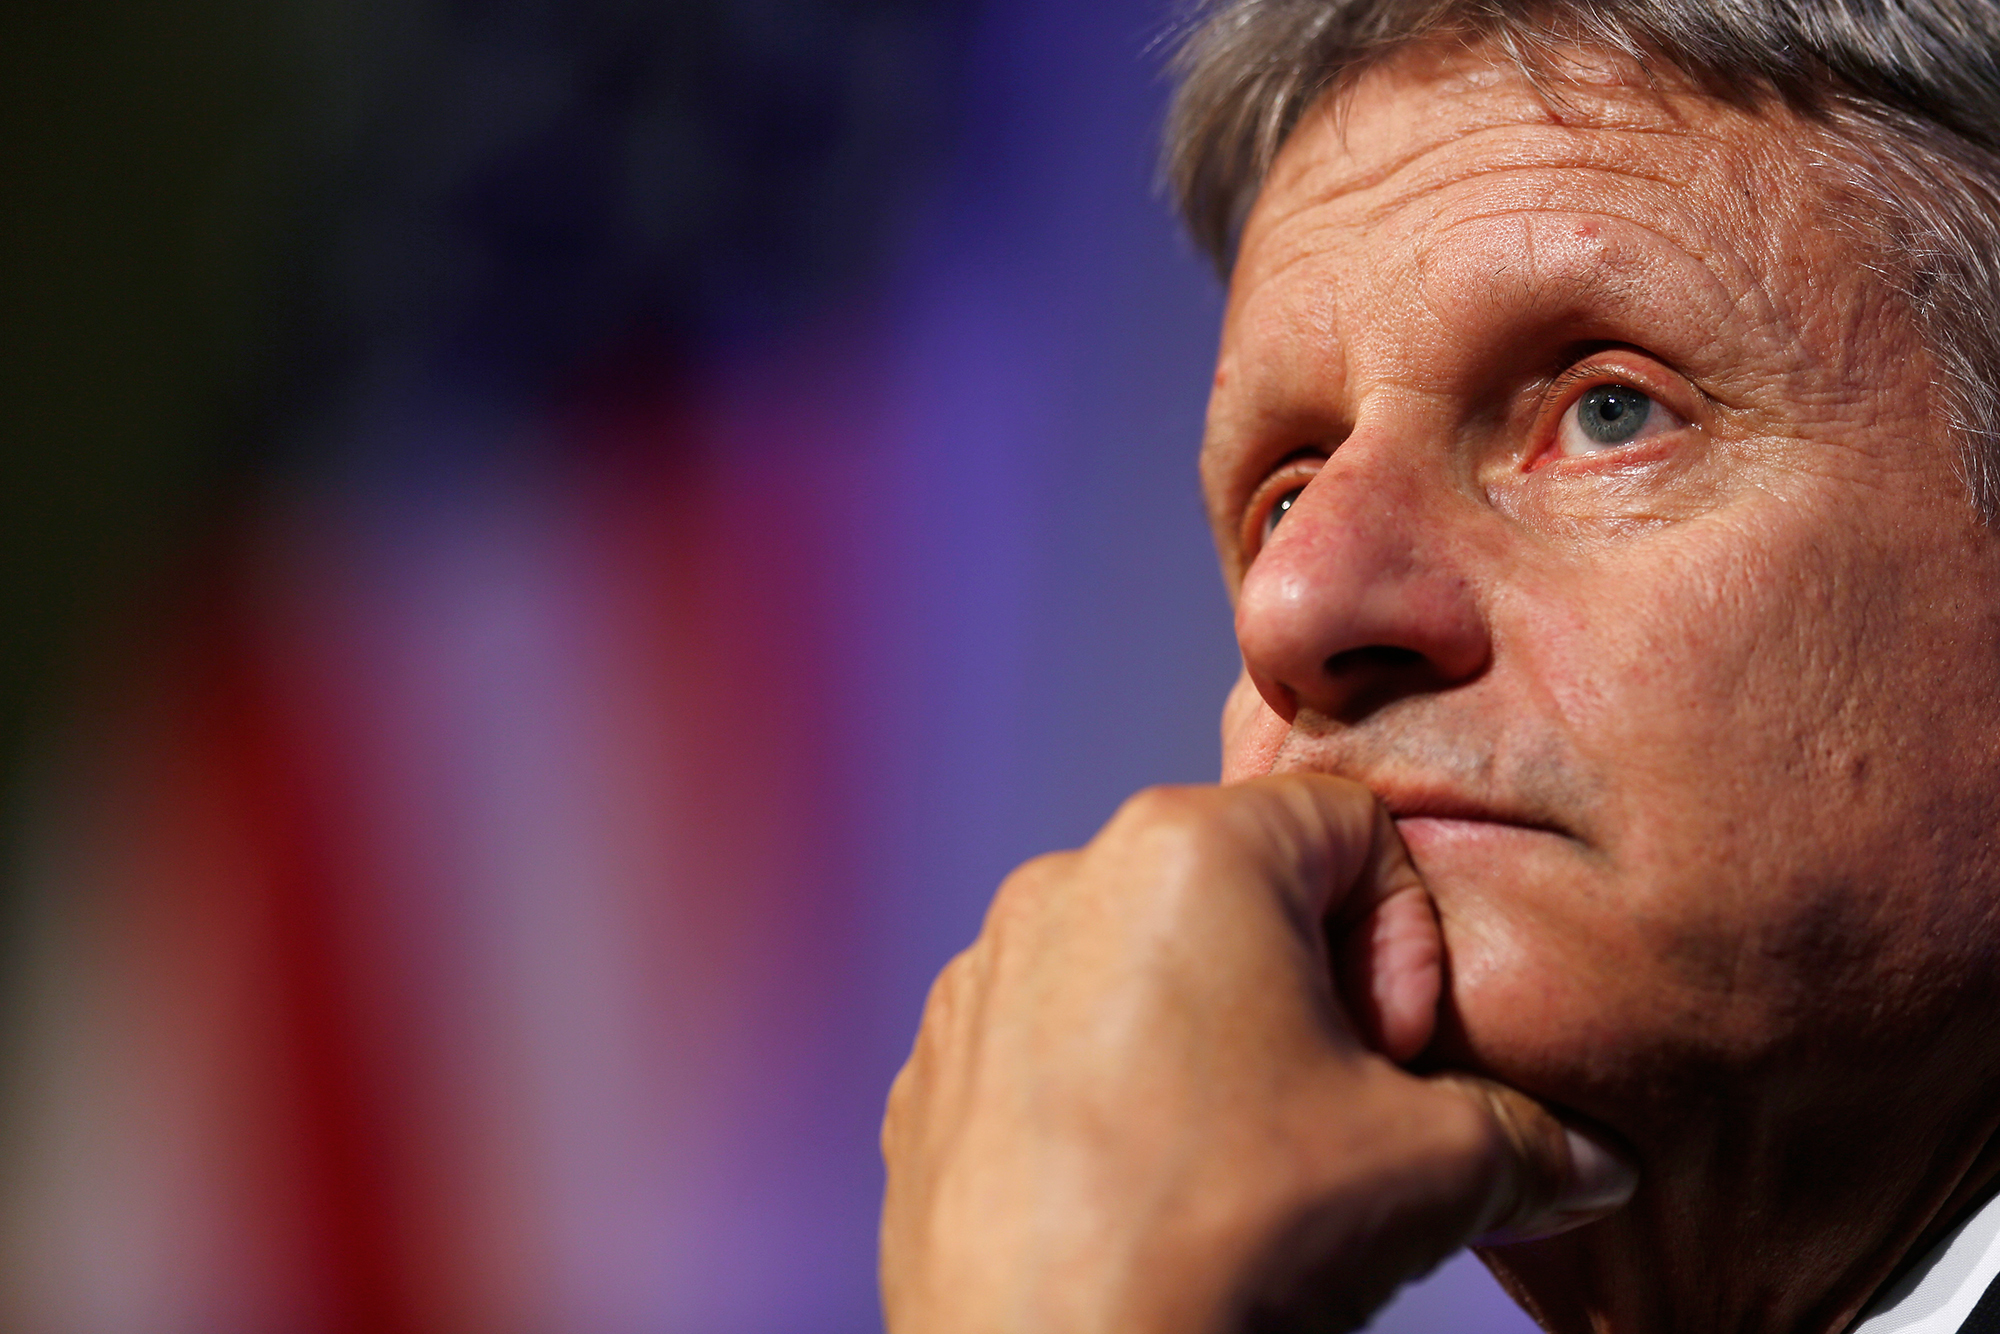 Gary Johnson, 2016 Libertarian presidential nominee, listens to questions from audience members during a campaign event at Purdue University in West Lafayette, Ind., on Sept. 13, 2016.